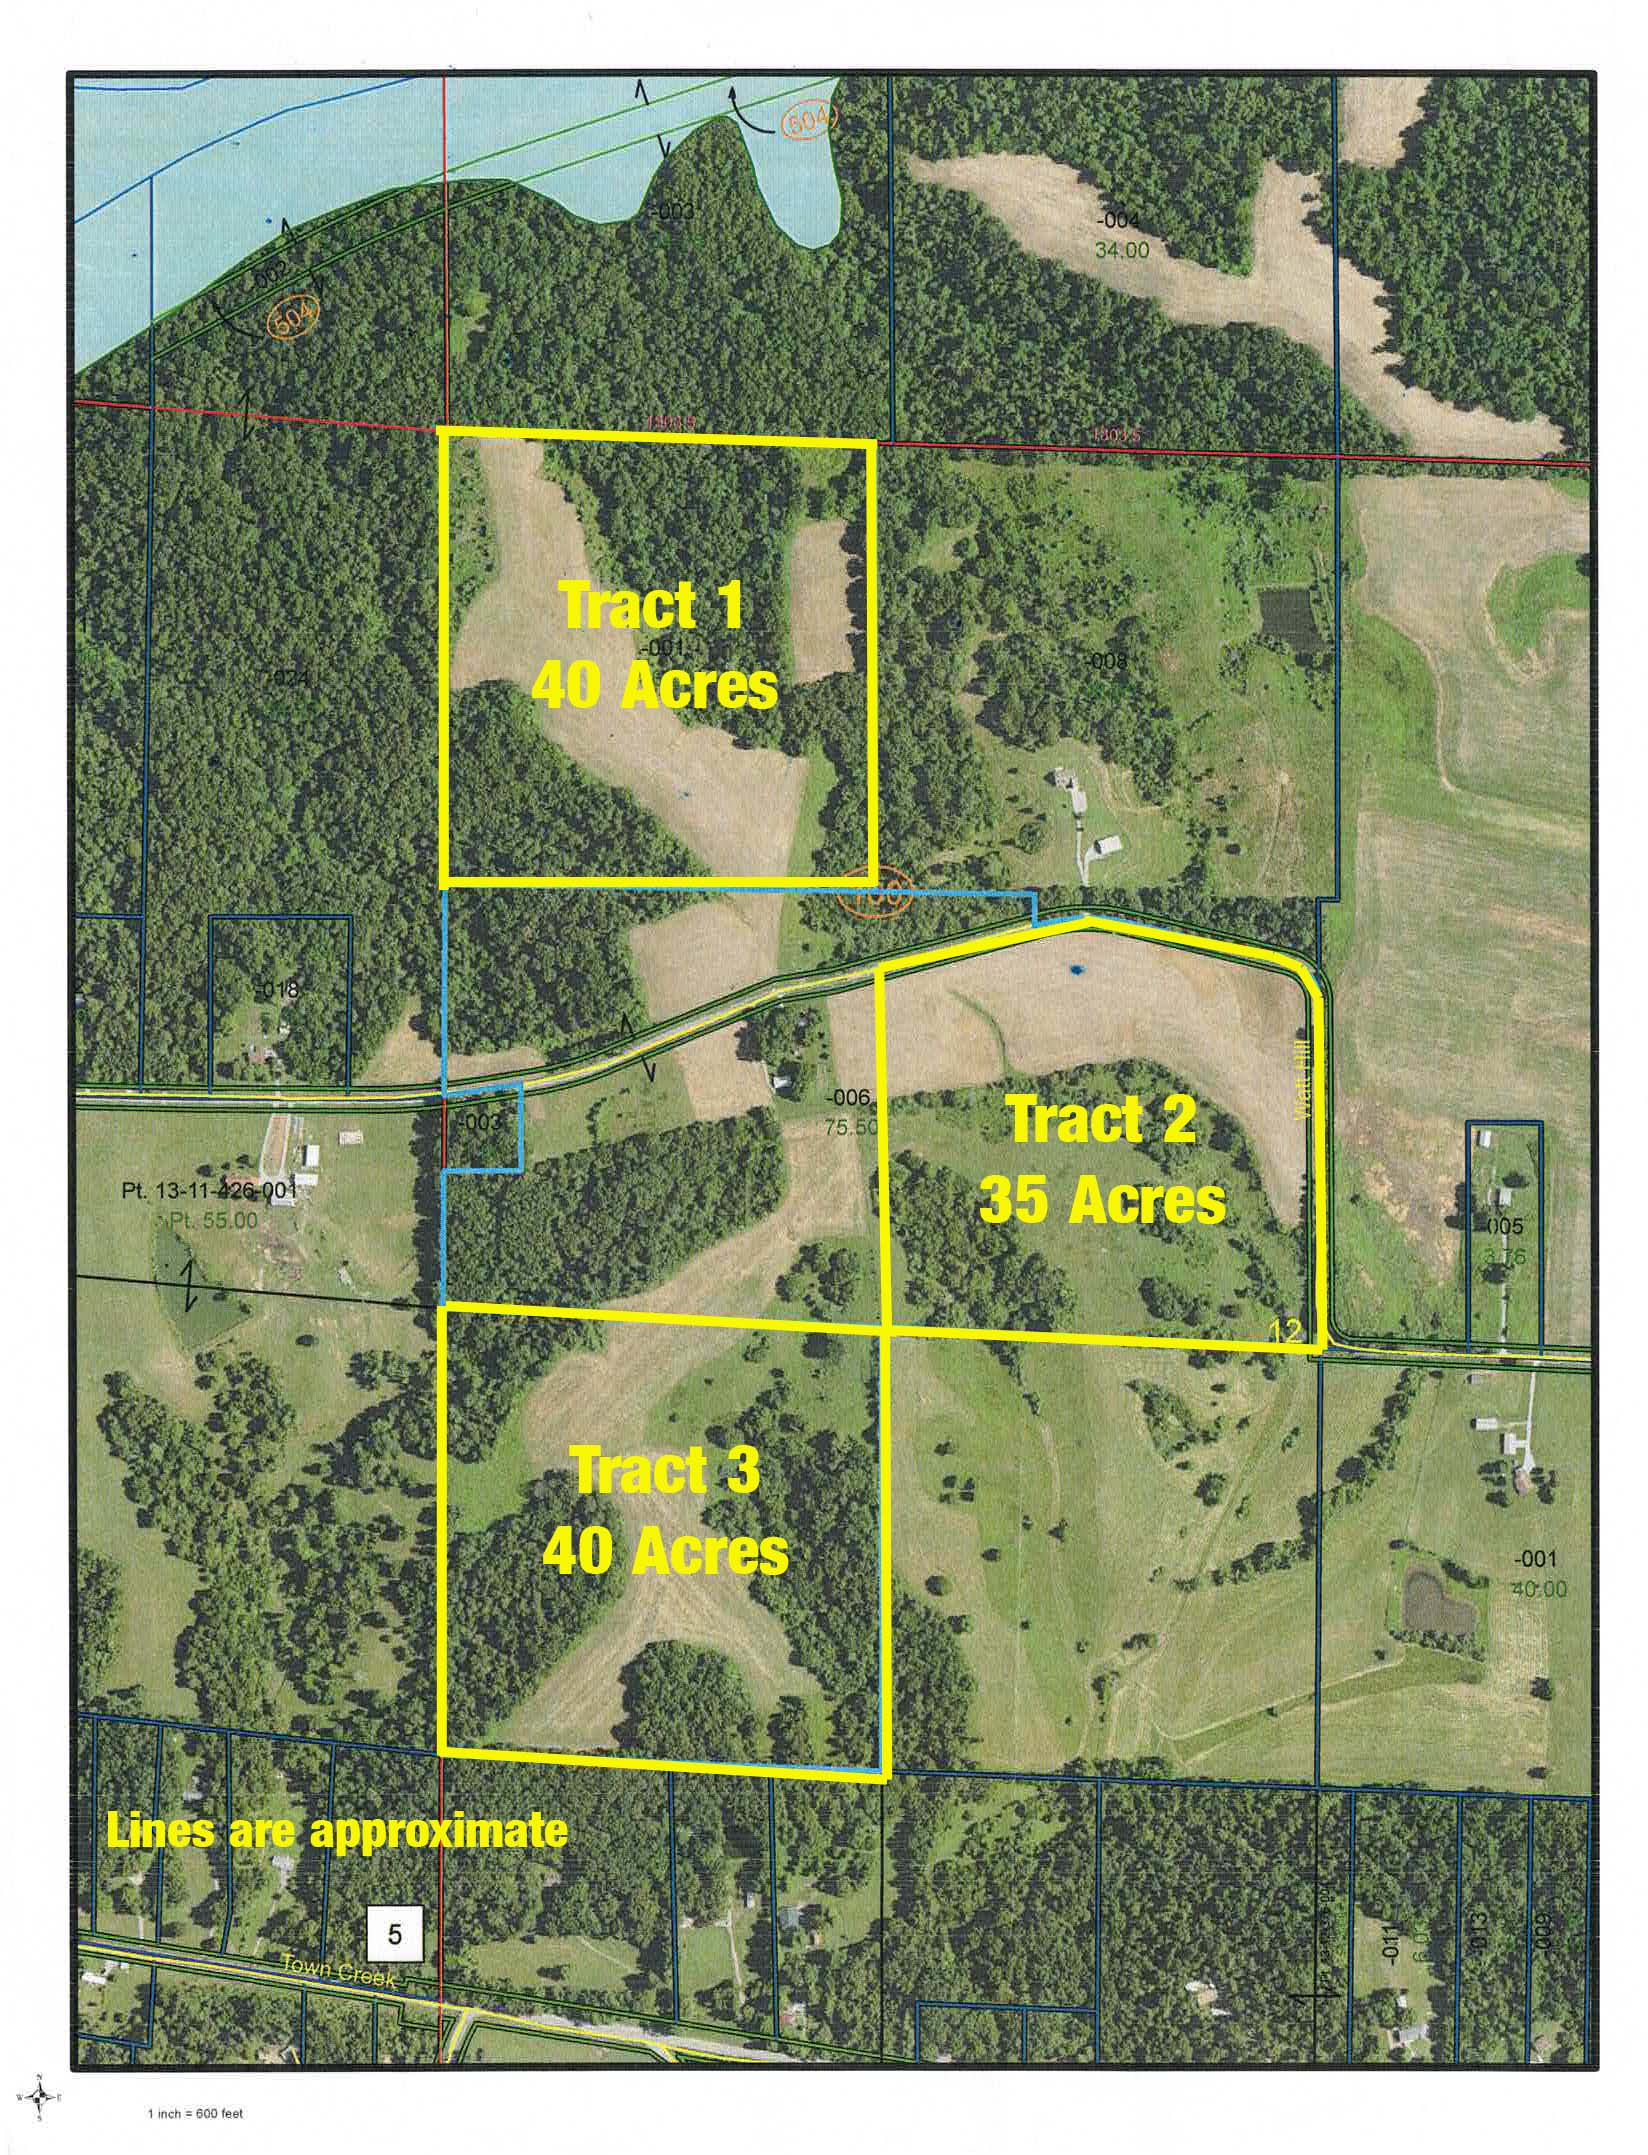 Aerial View Maps Of Property